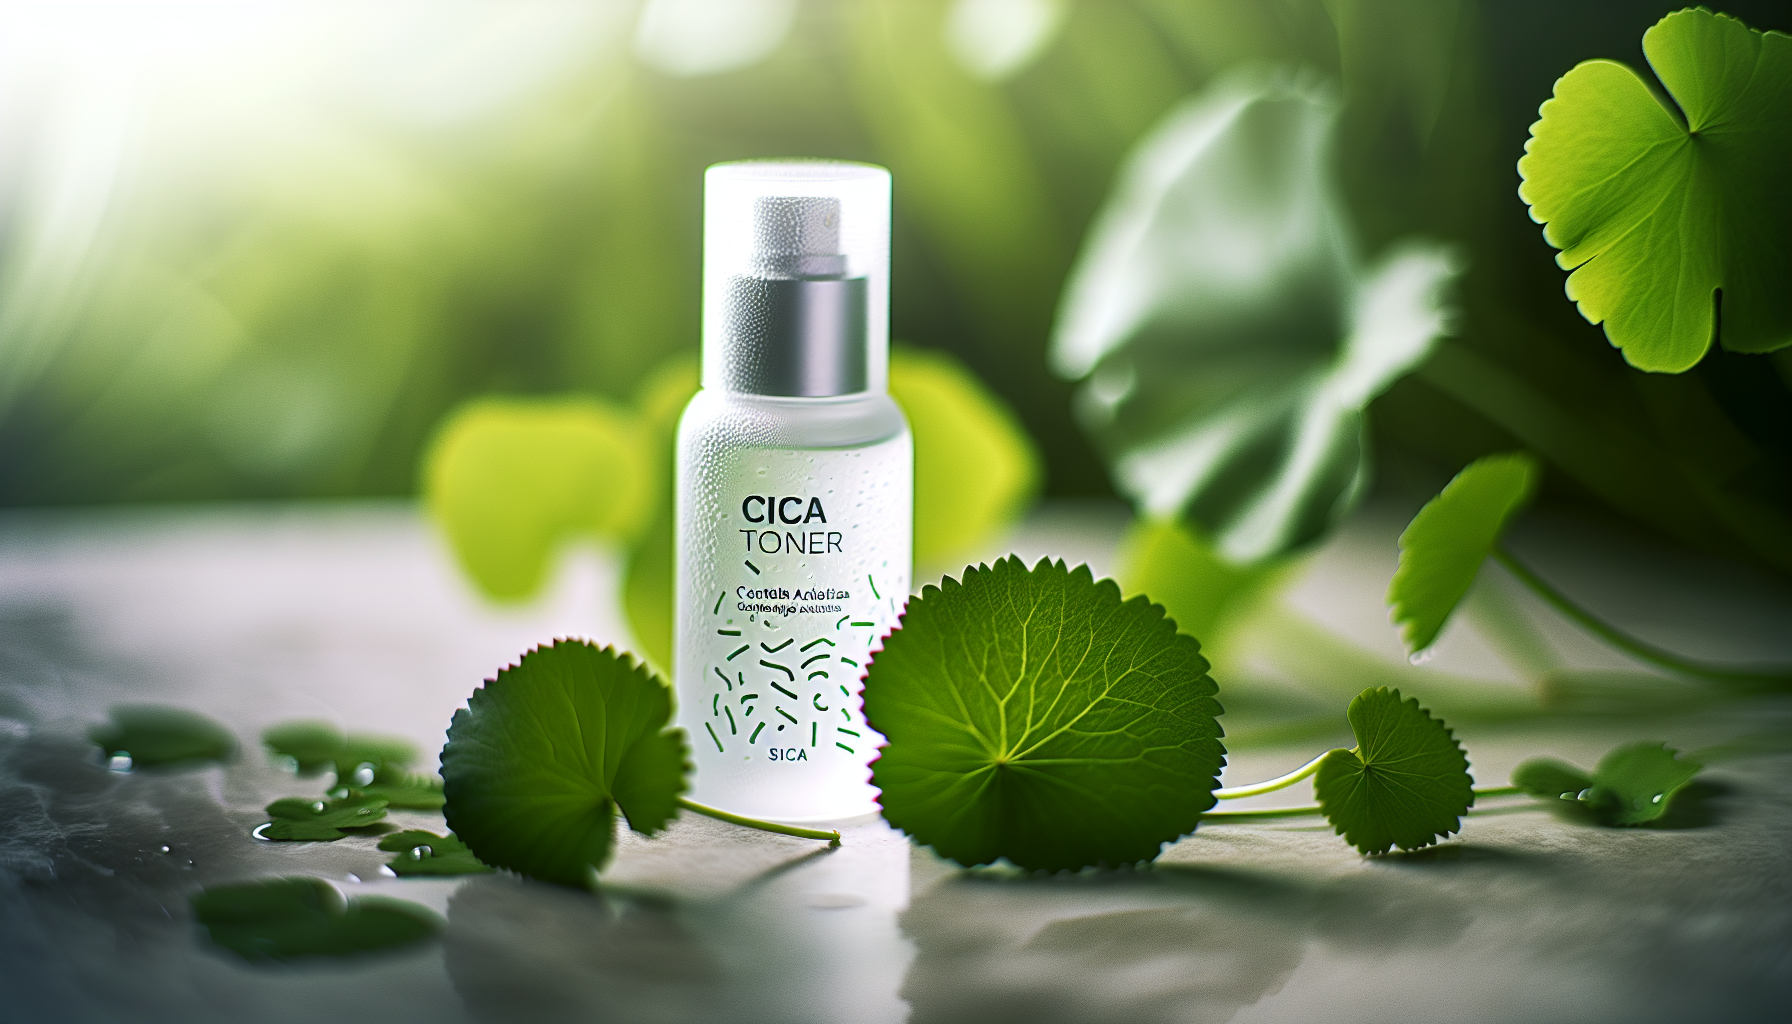 Bottle of cica toner surrounded by centella asiatica leaves